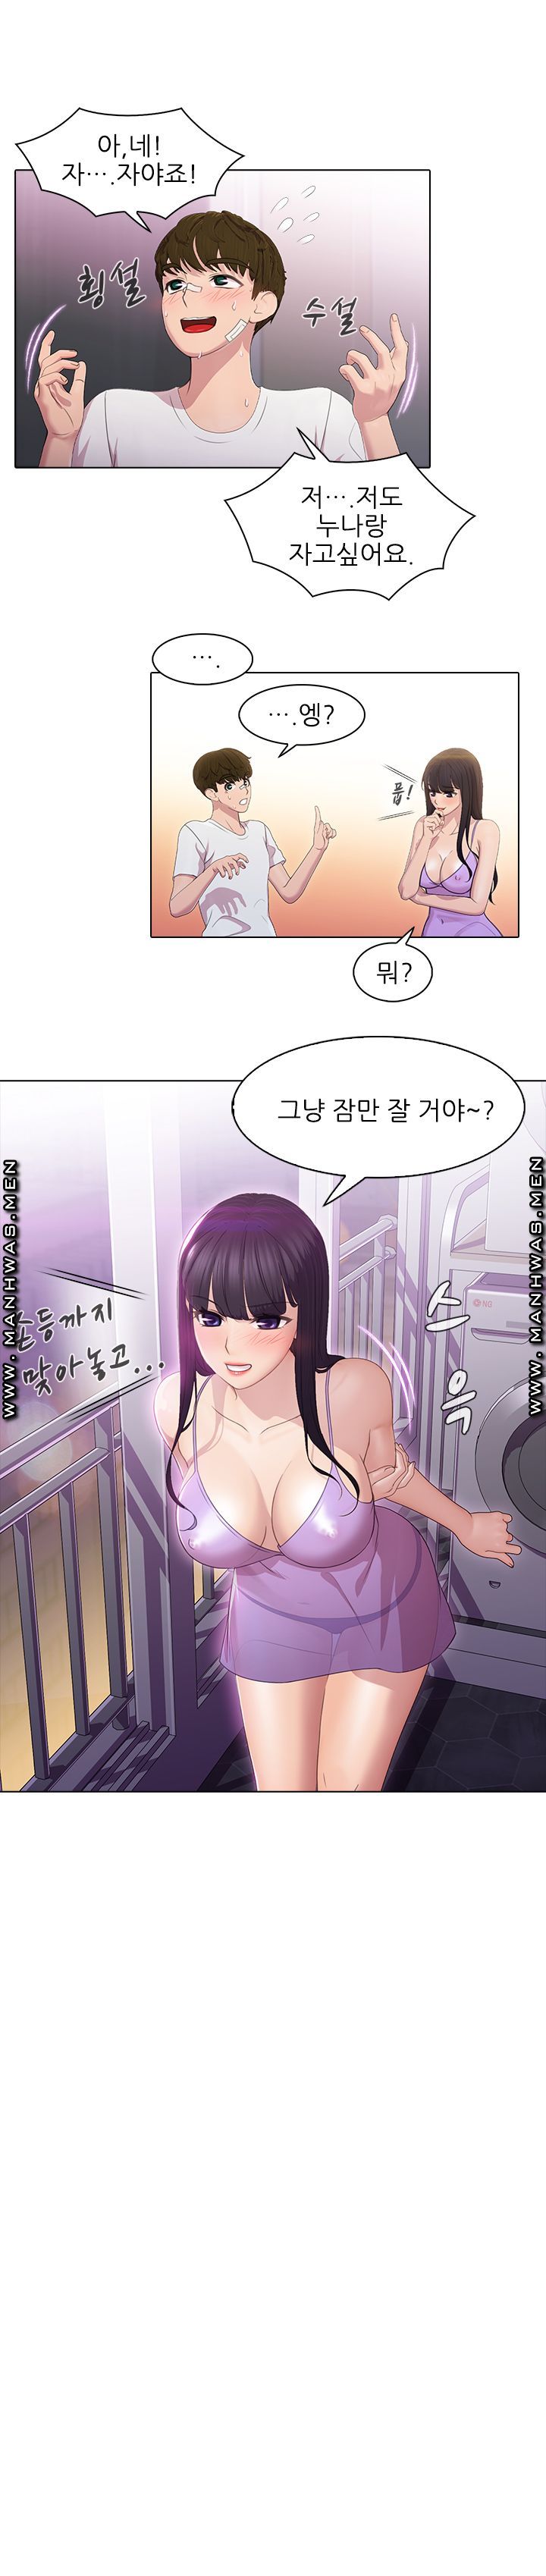 Sister's Friend Raw - Chapter 2 Page 14